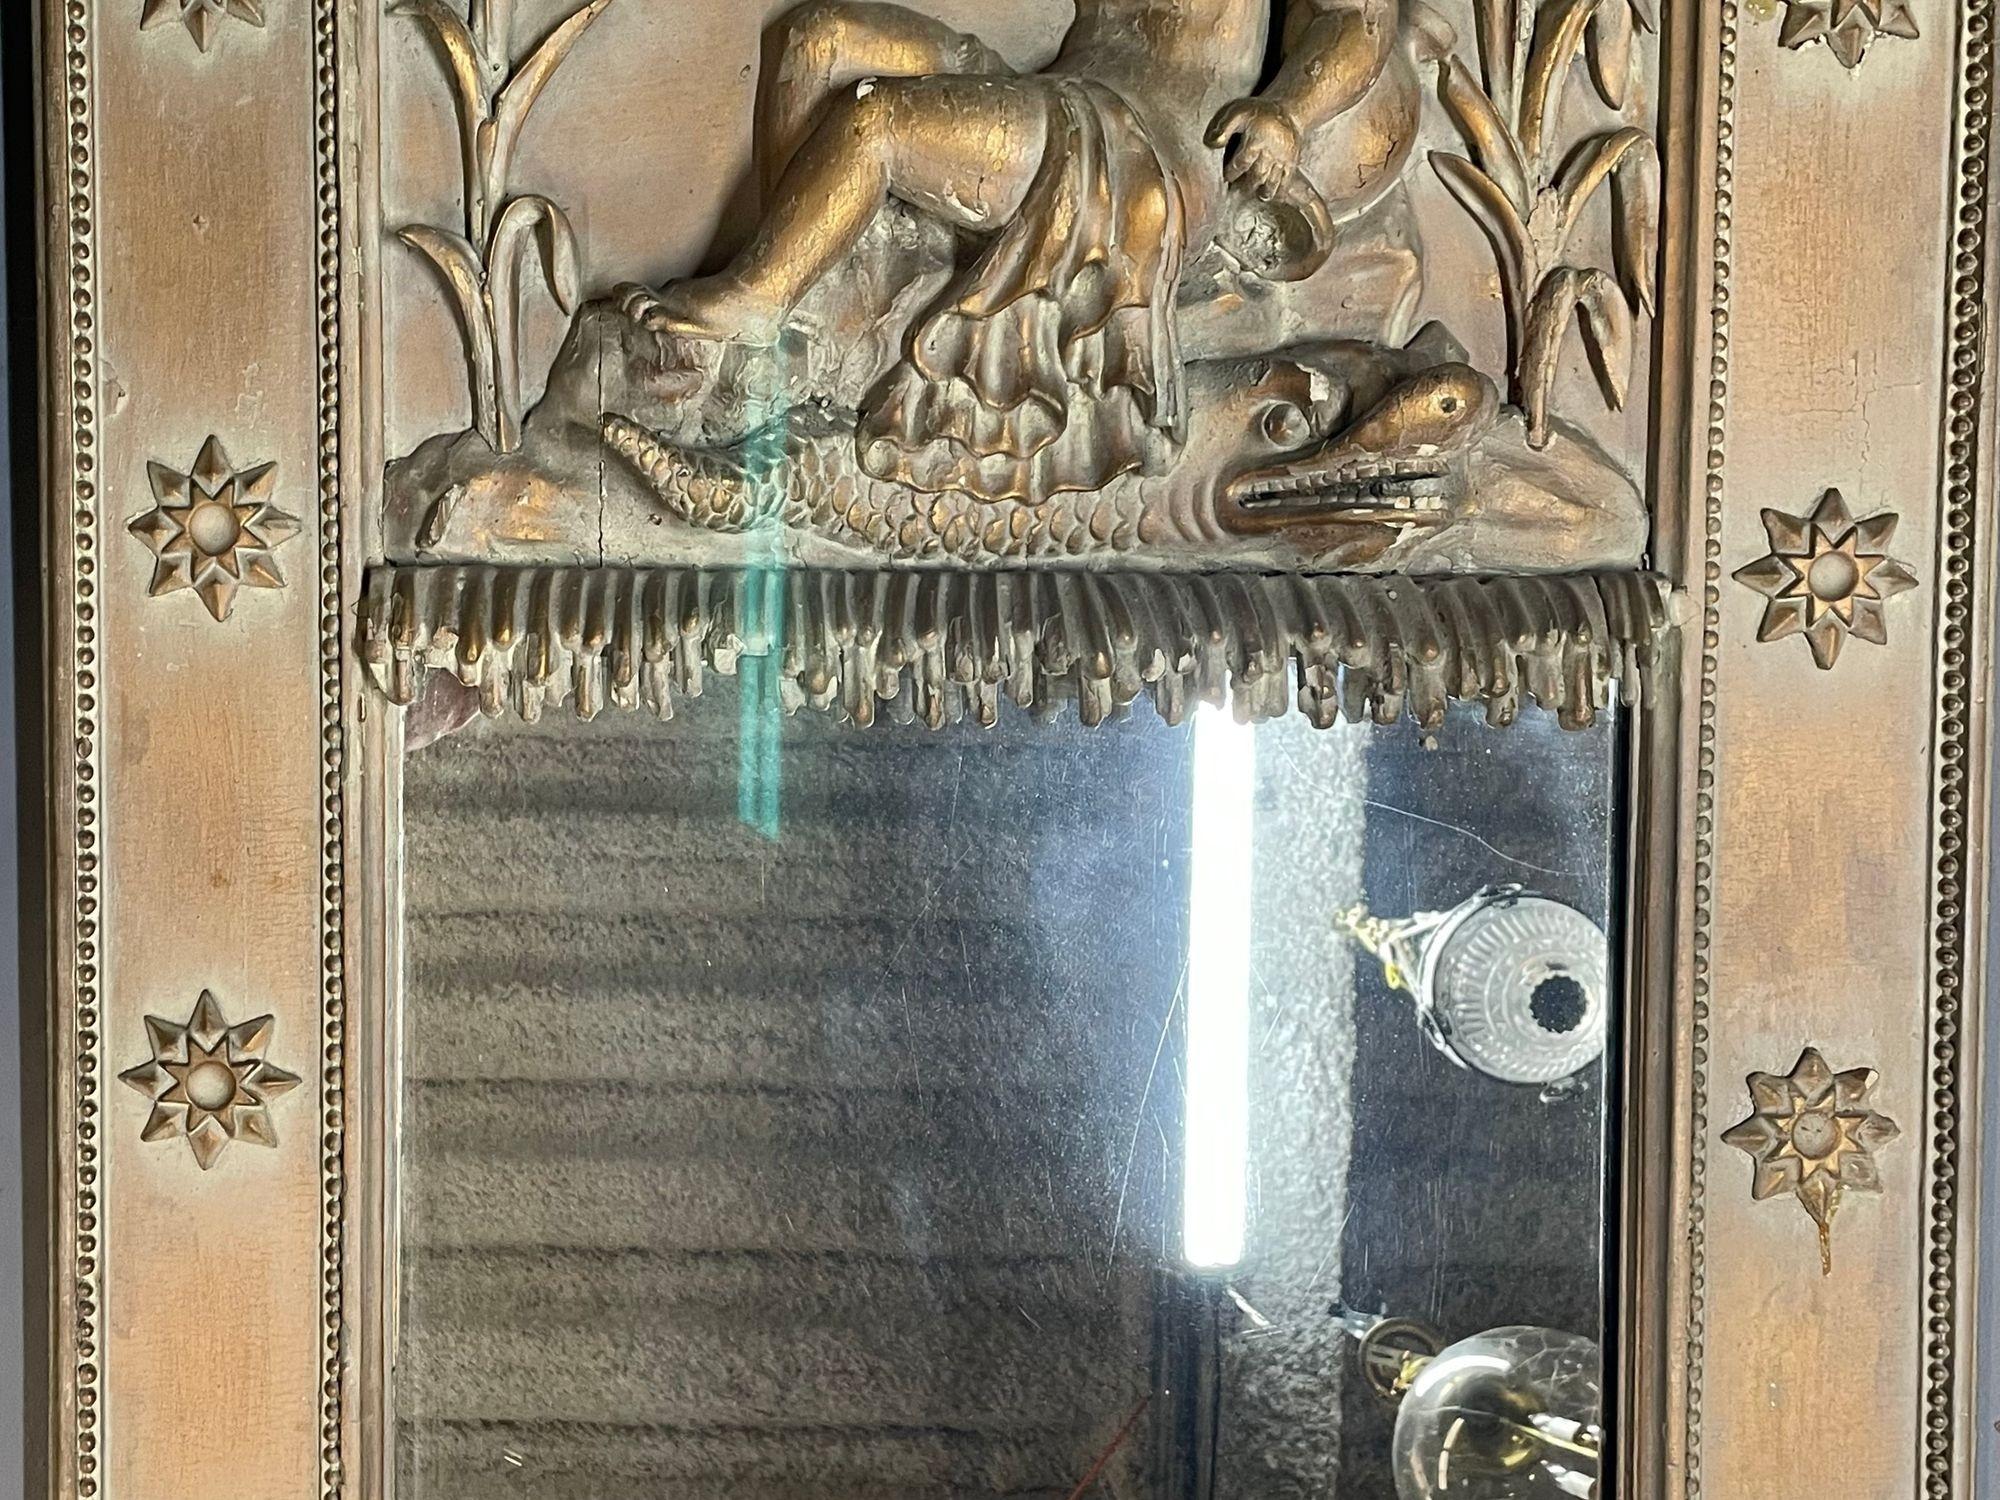 19th century wall, console or Pier Cherub mirror
 
Wall or console mirror having a clear antique center panel flanked by a luminous gilt wood frame. Robust carvings of lion faces and stars support the trumeau style top that bears the mirror's